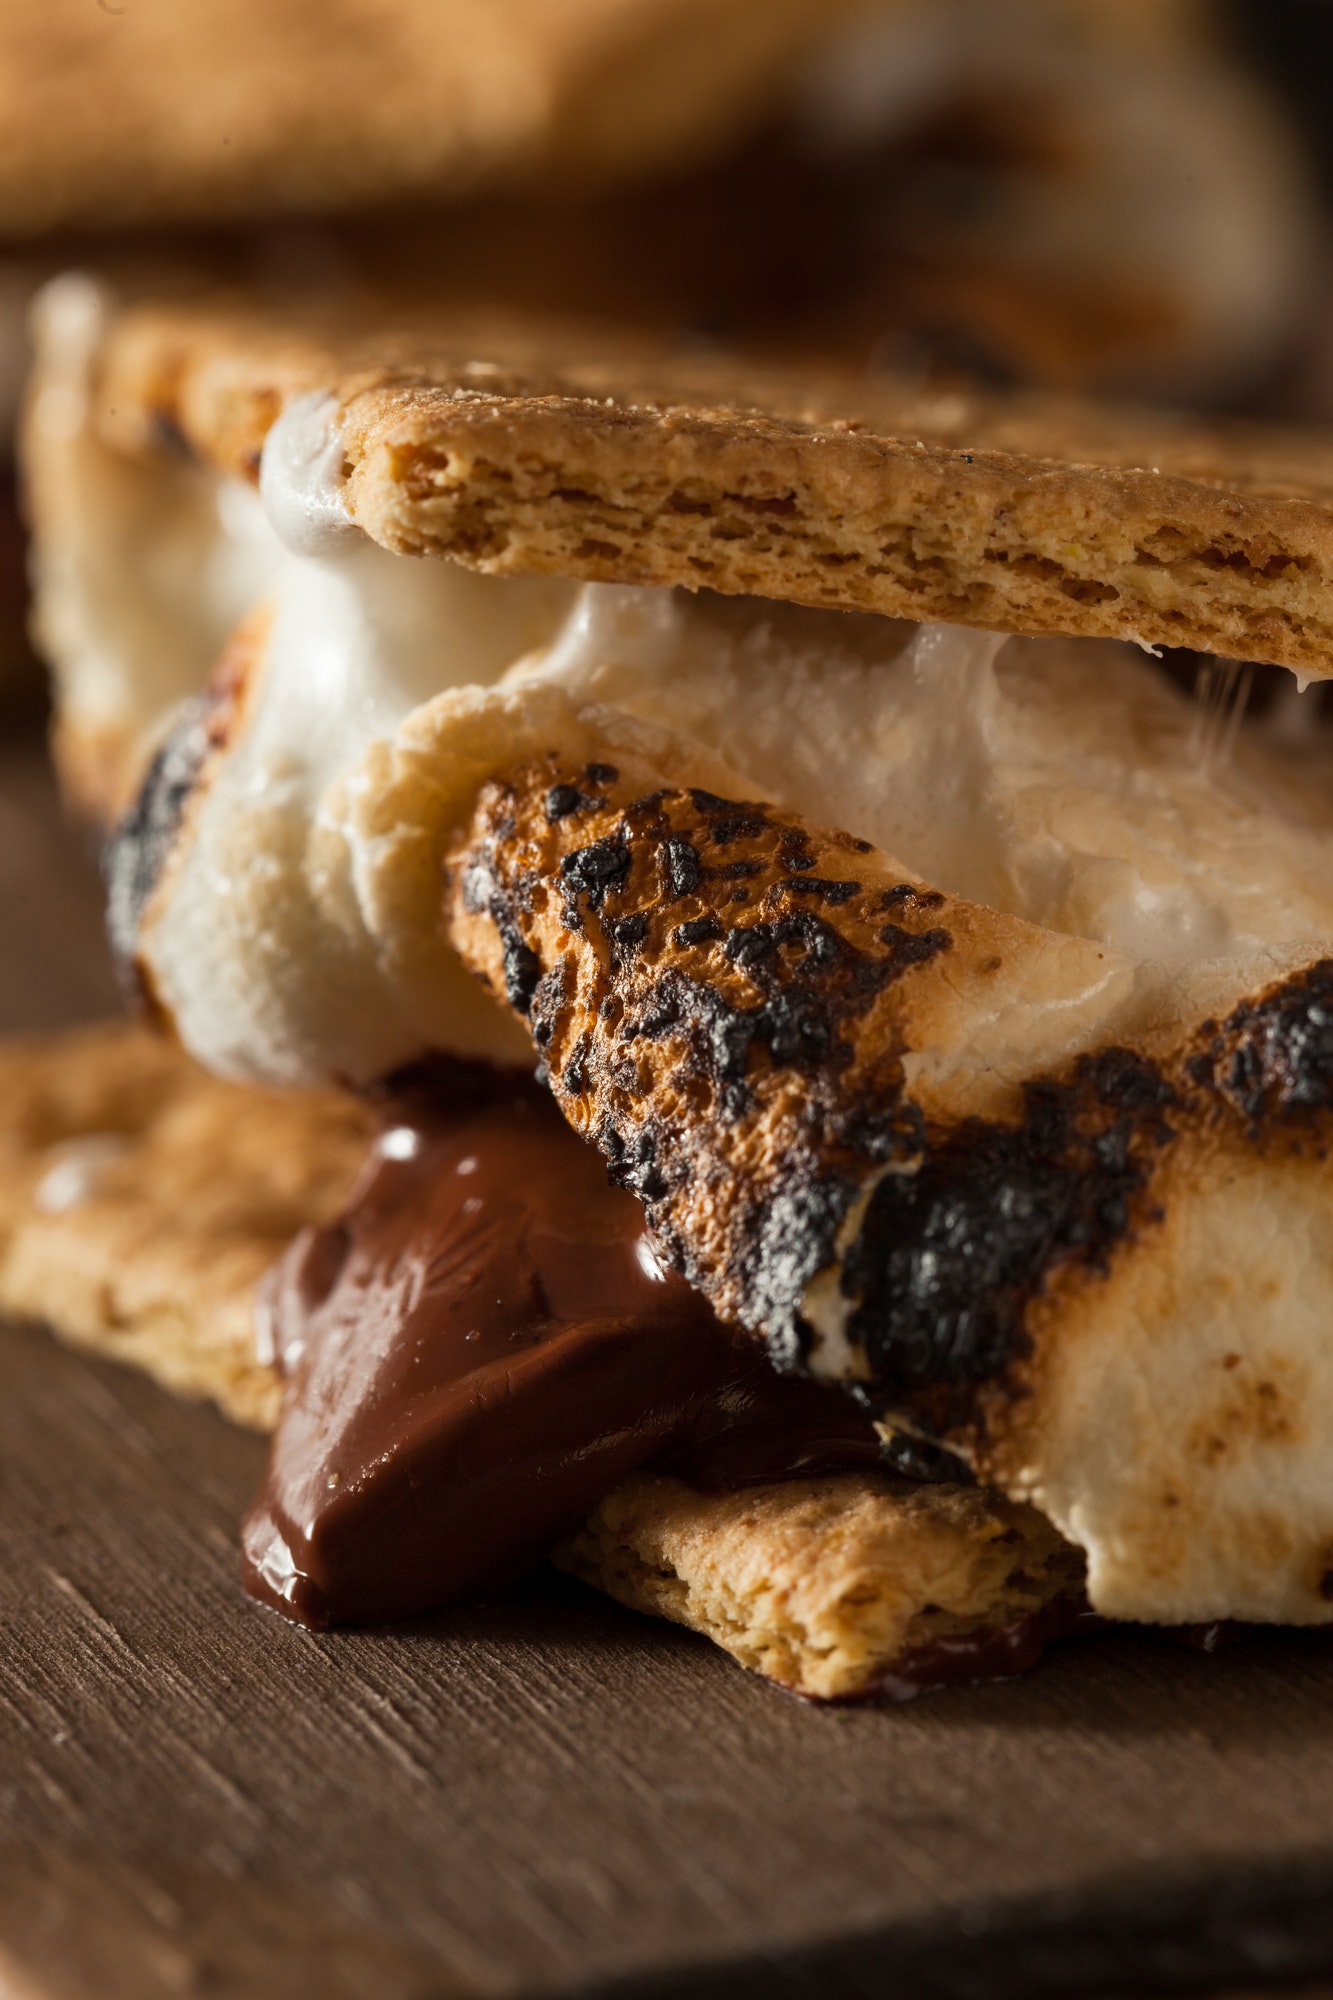 Homemade Gooey S'mores with Chocolate